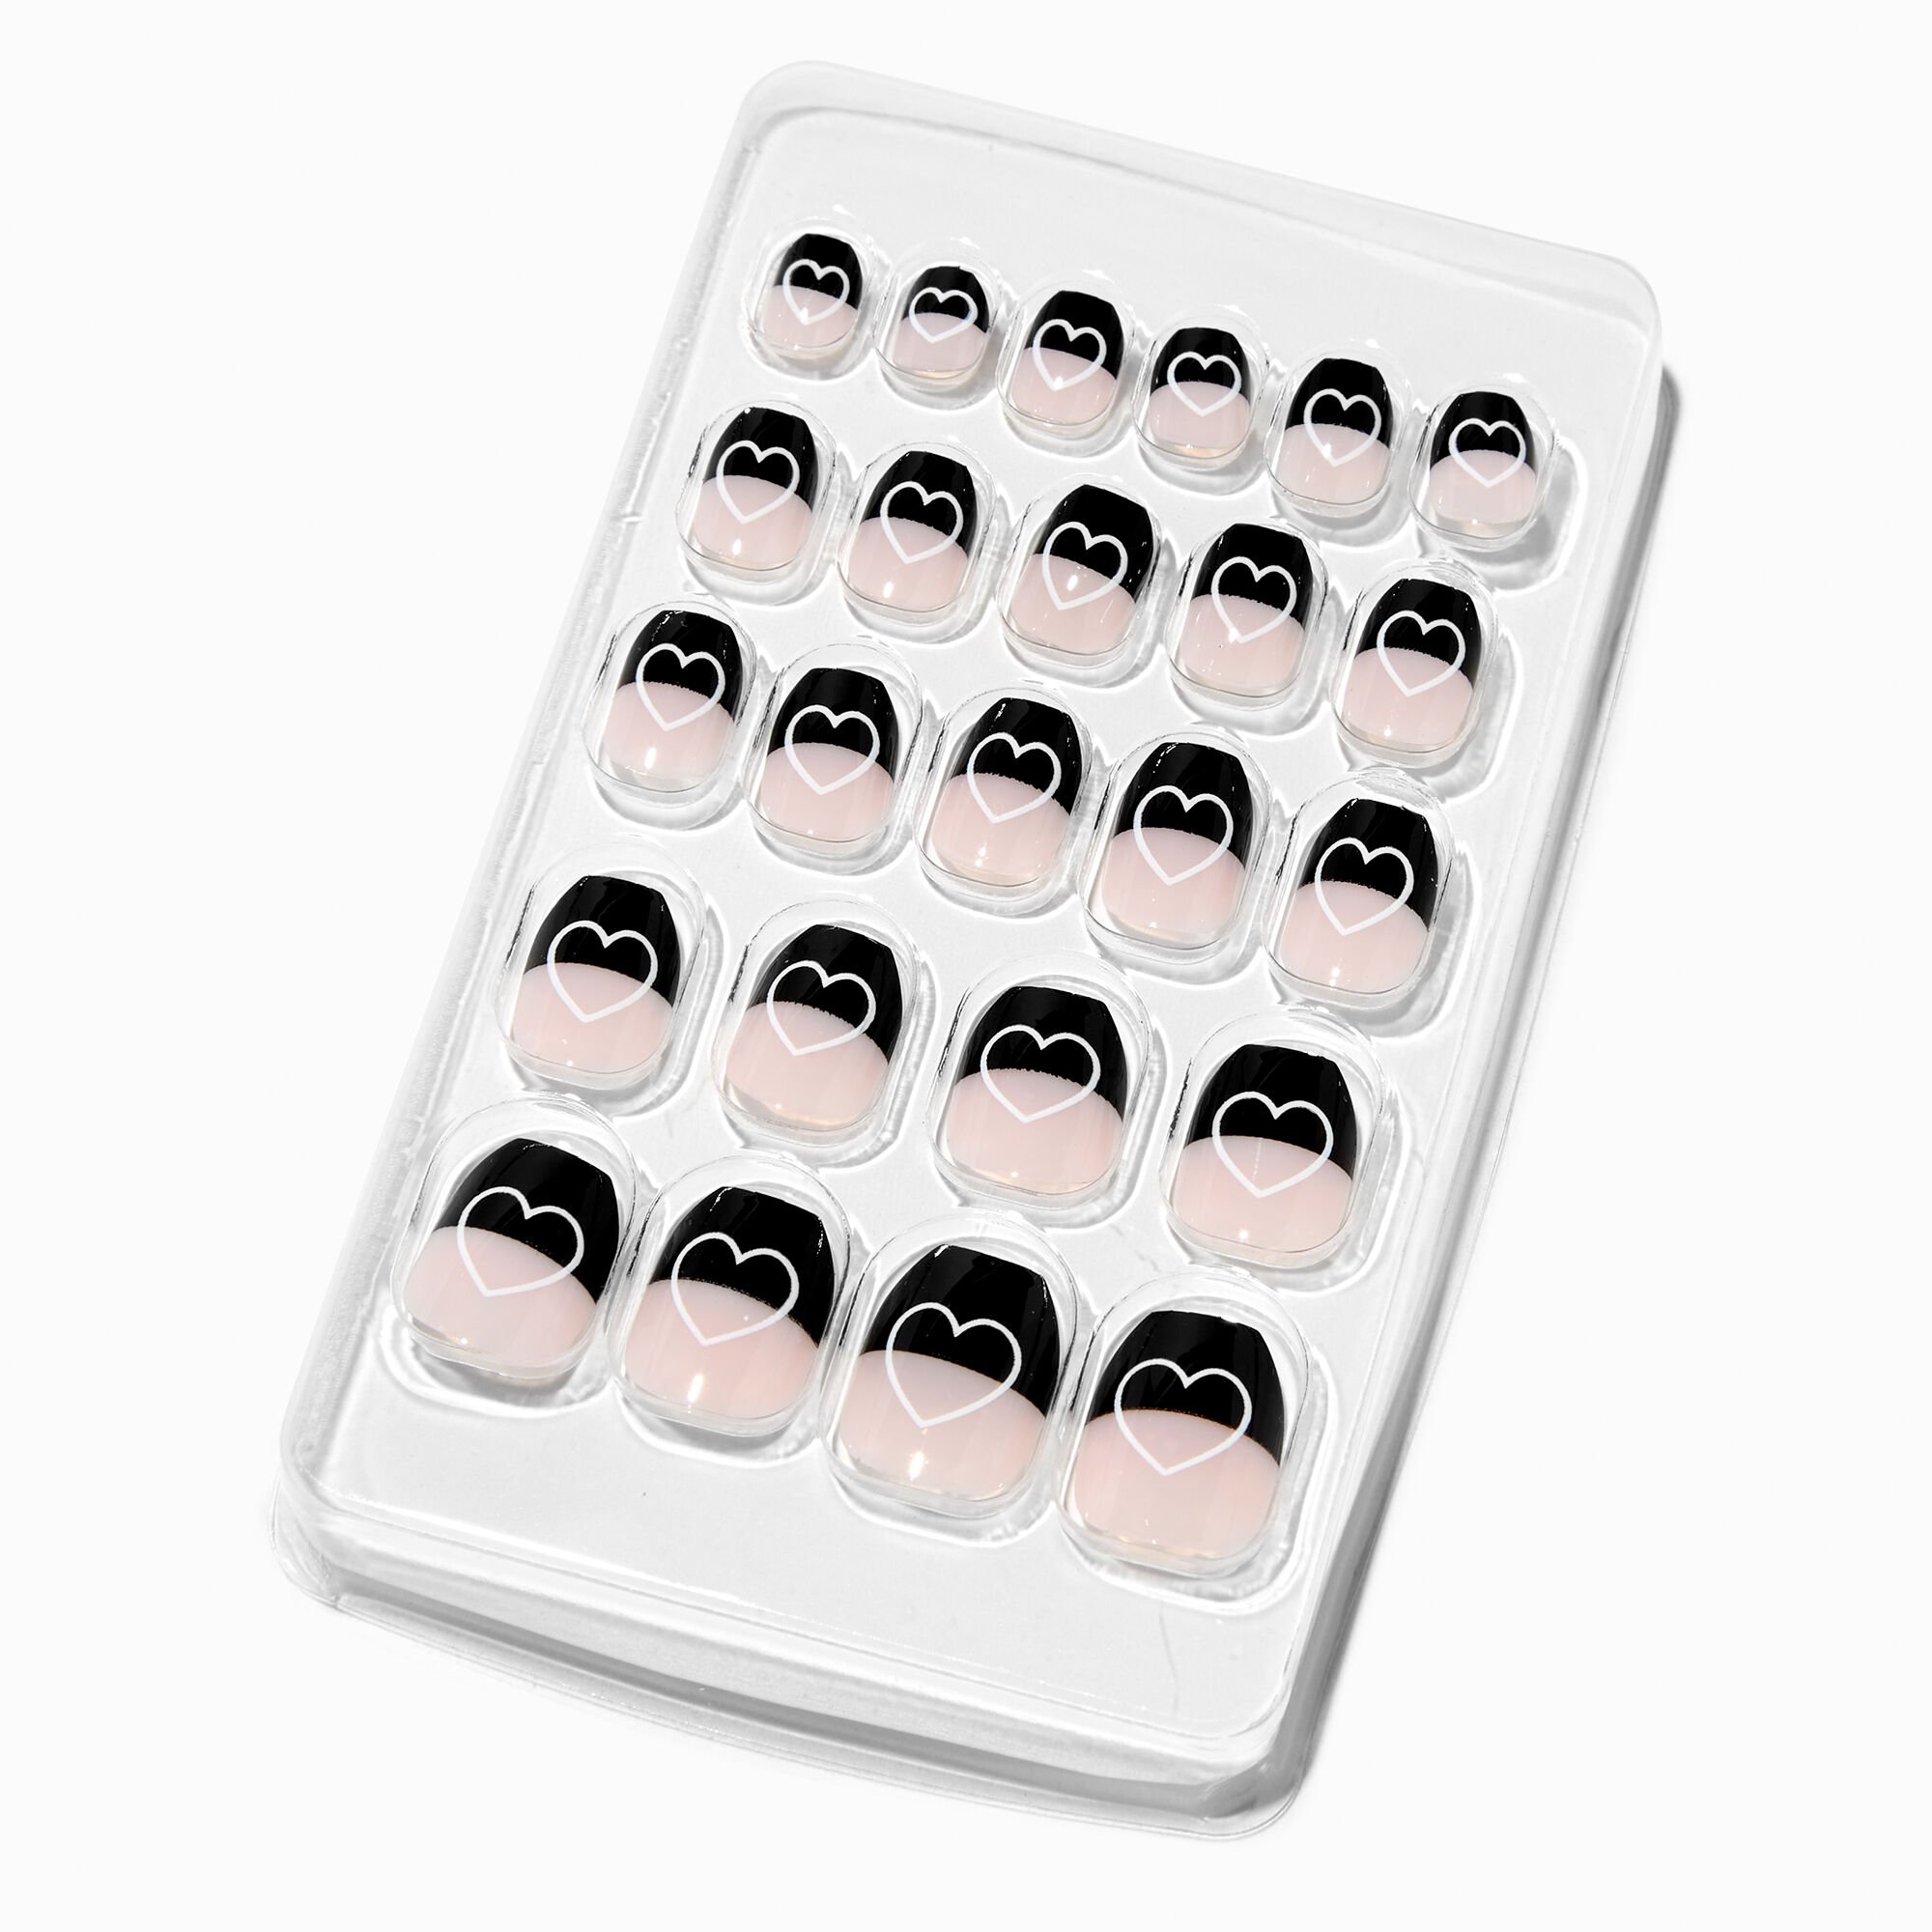 View Claires Half Heart Coffin Press On Vegan Faux Nail Set 24 Pack Black information